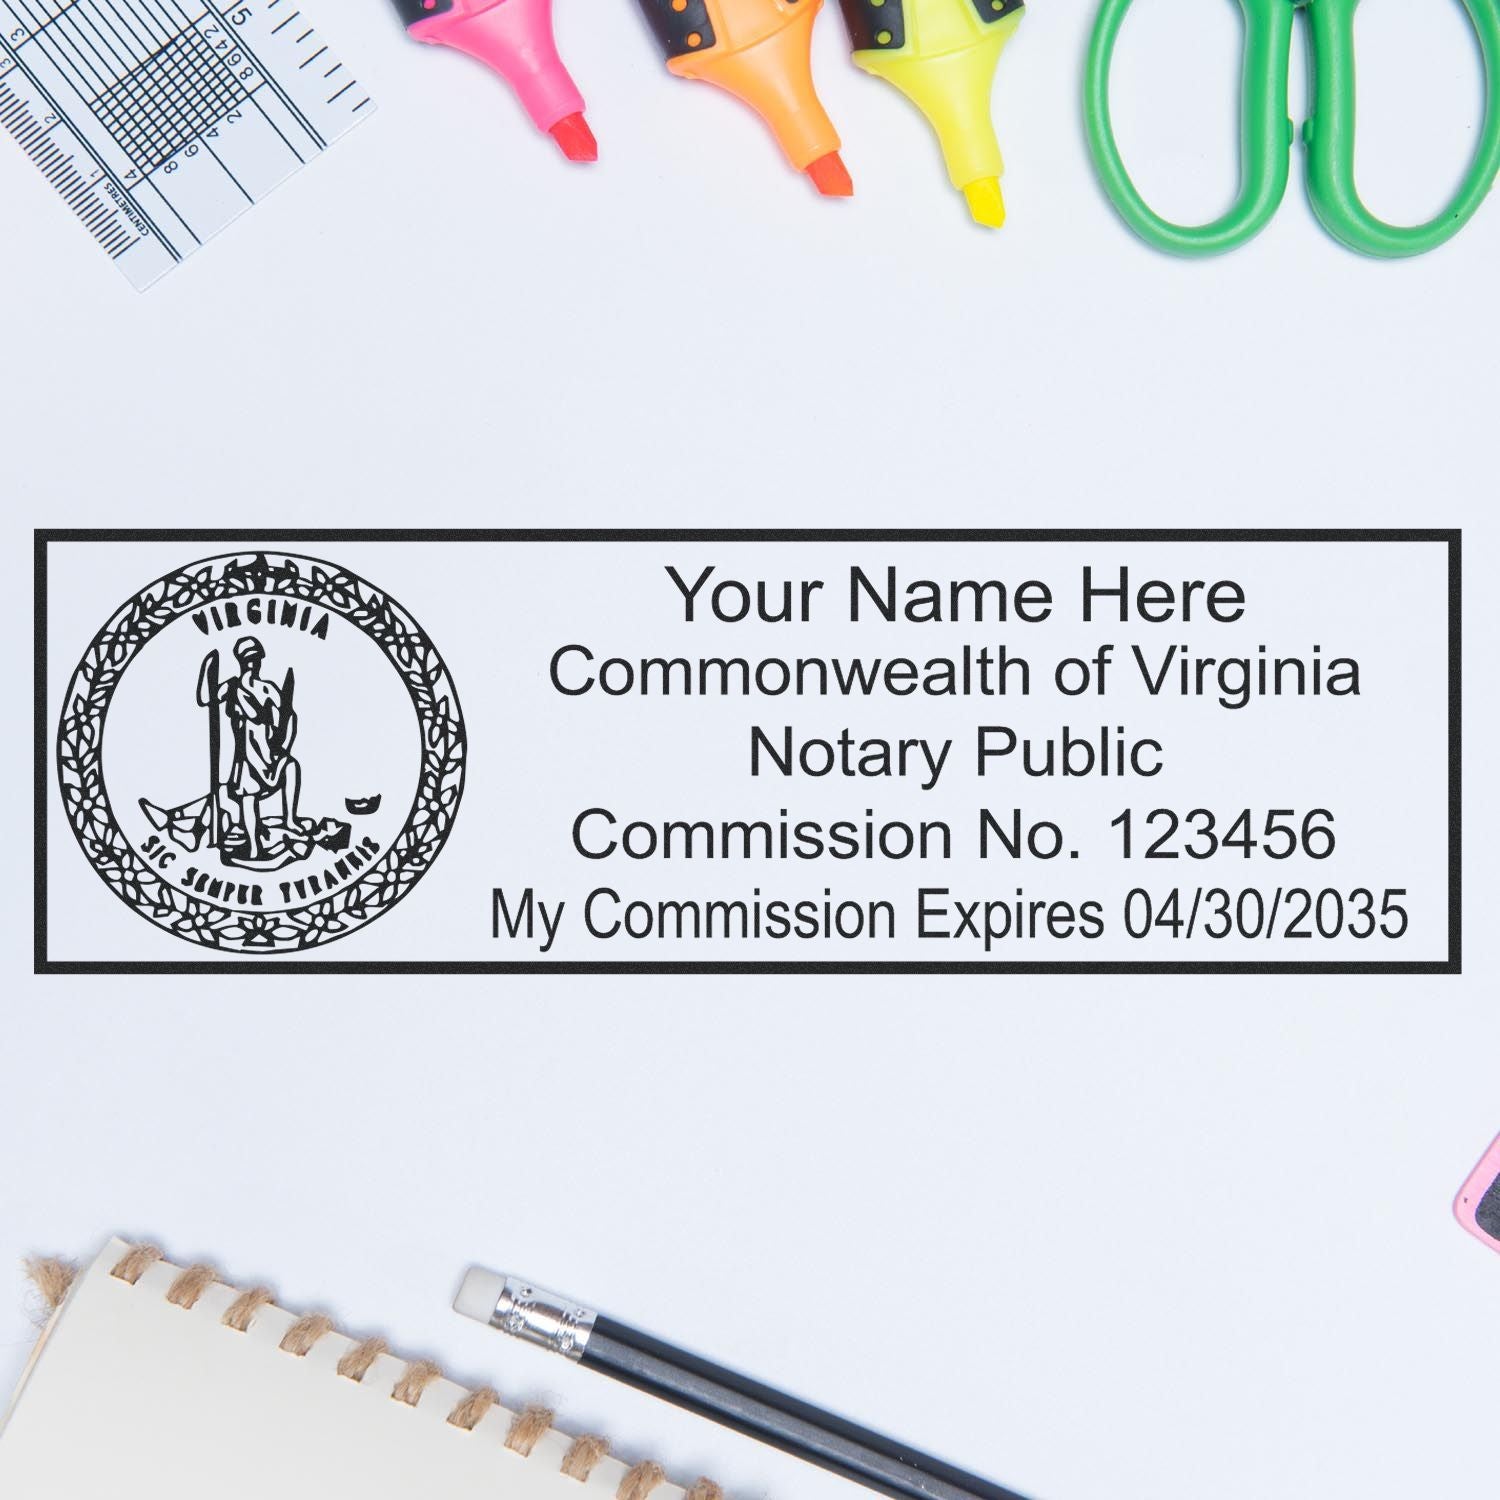 The main image for the MaxLight Premium Pre-Inked Virginia State Seal Notarial Stamp depicting a sample of the imprint and electronic files